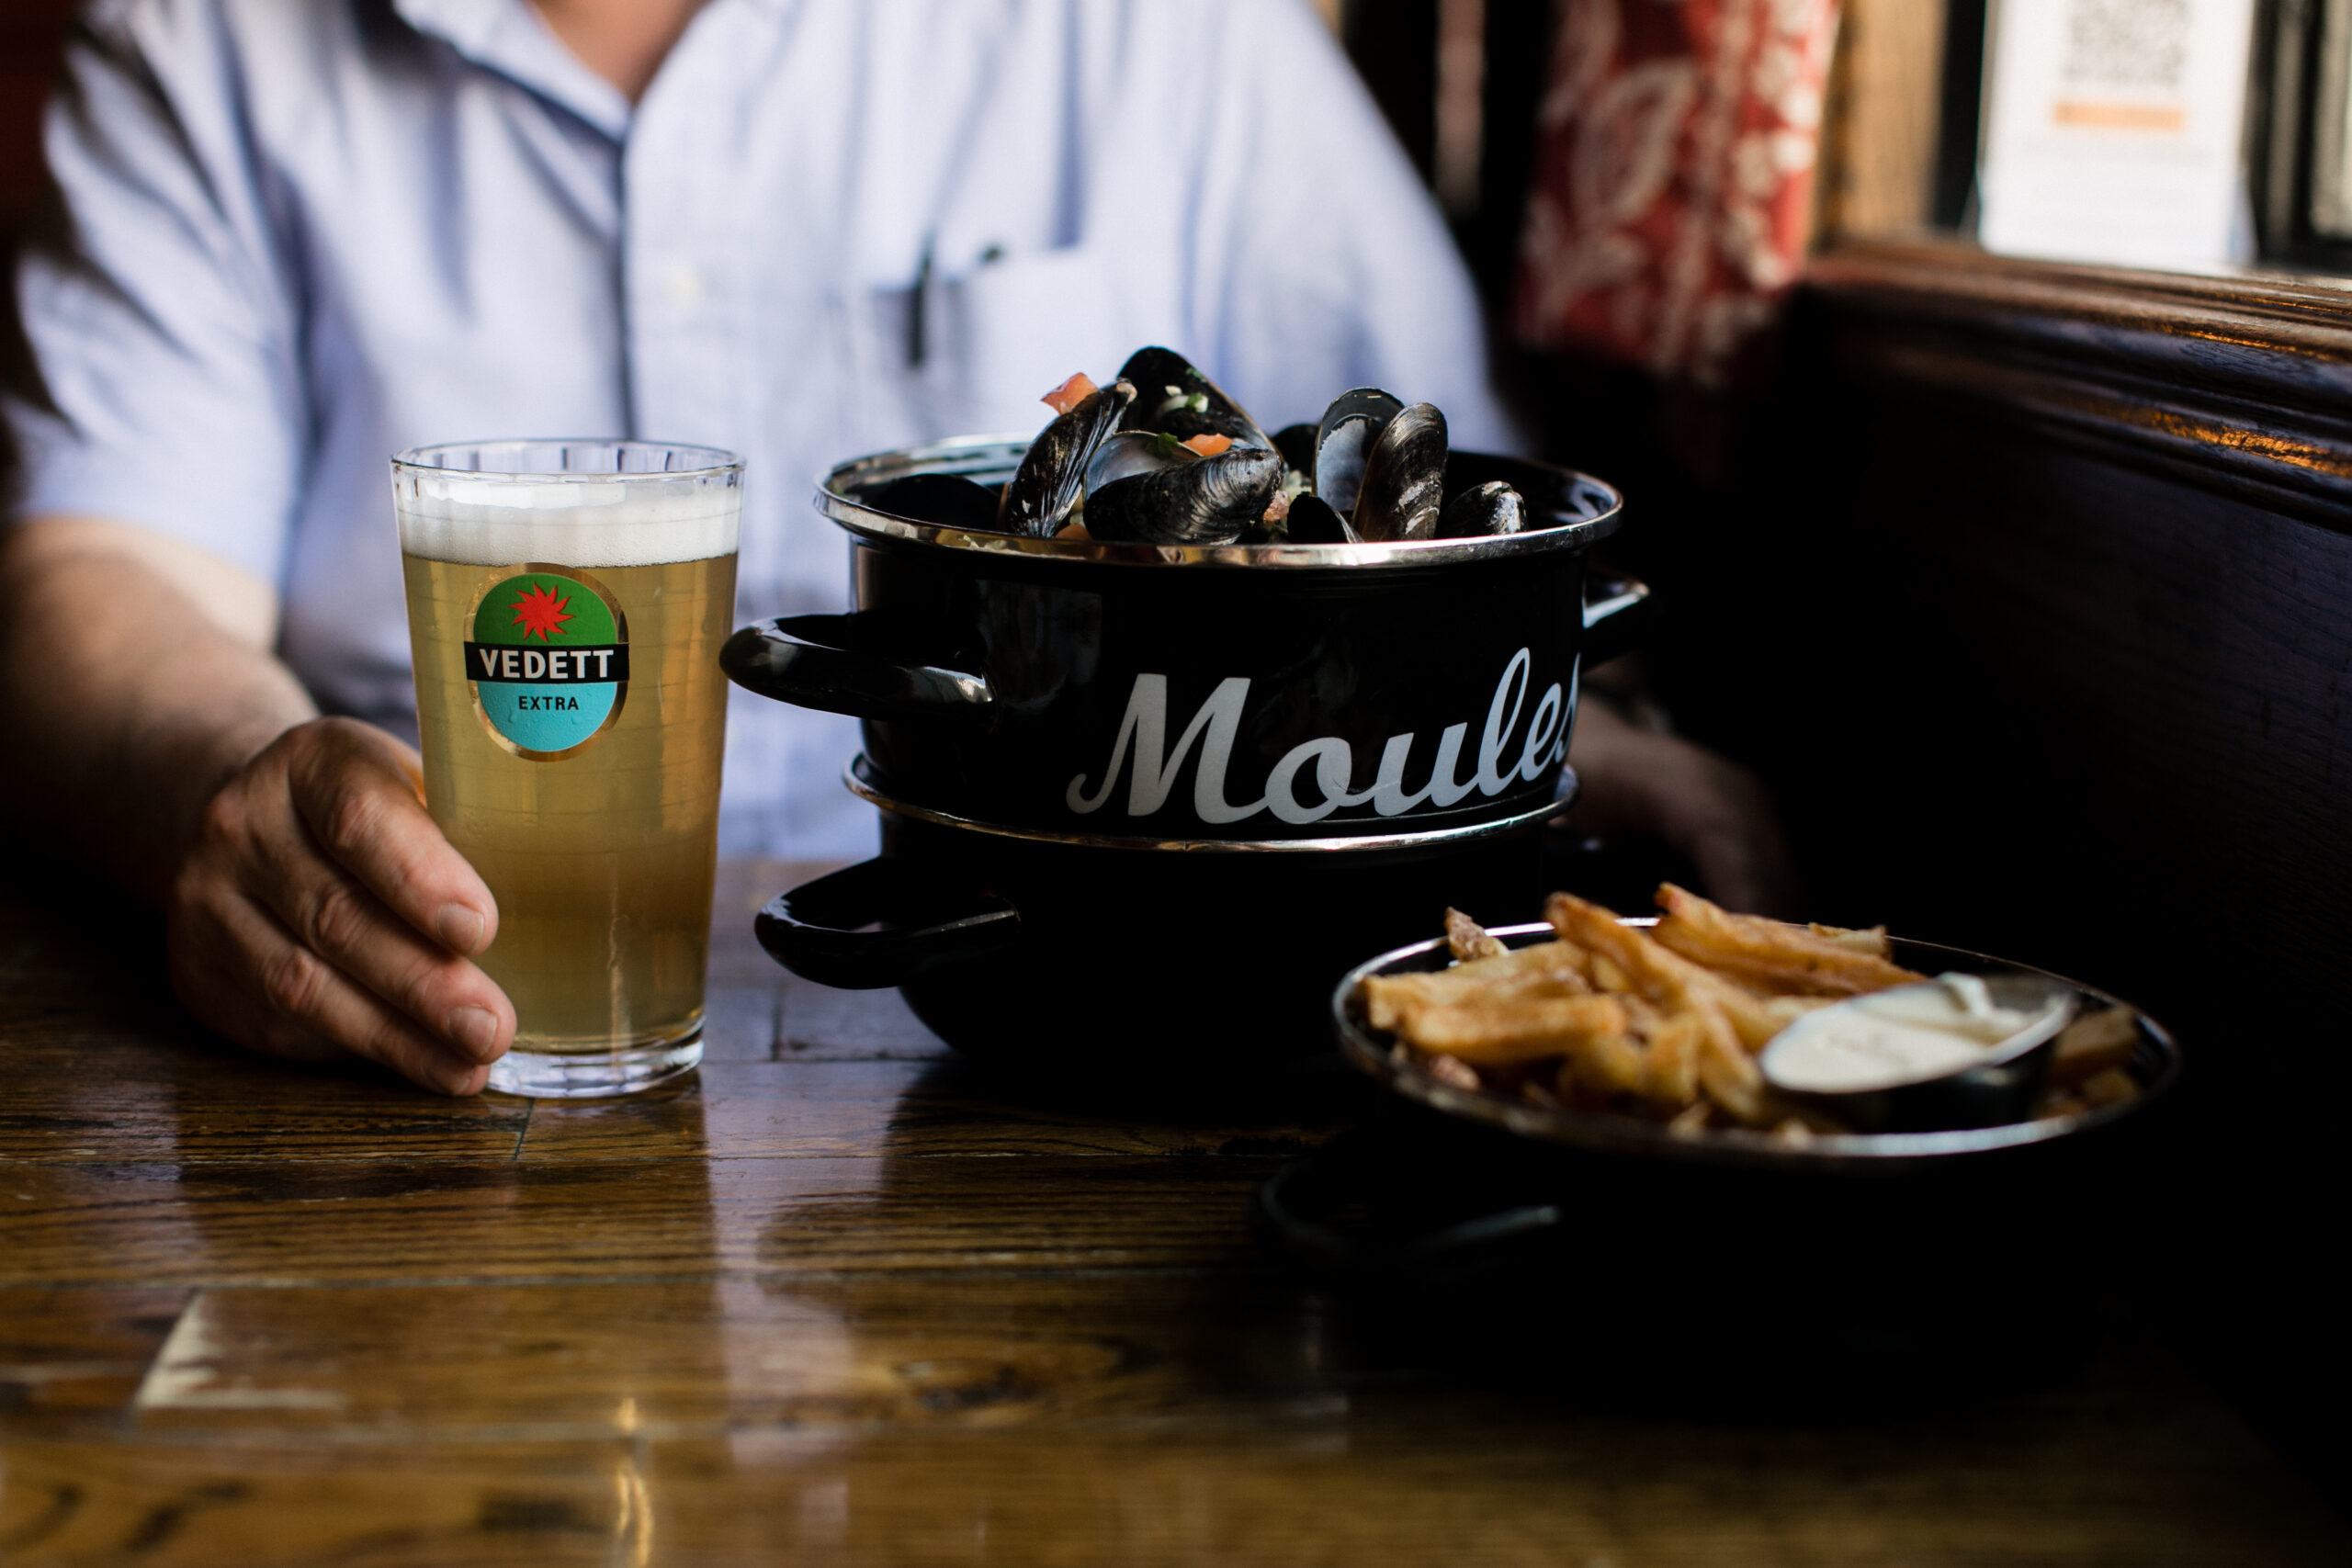 A table with pots of mussels and frites; a person's hand holding a glass of beer with their body blurred in the background.